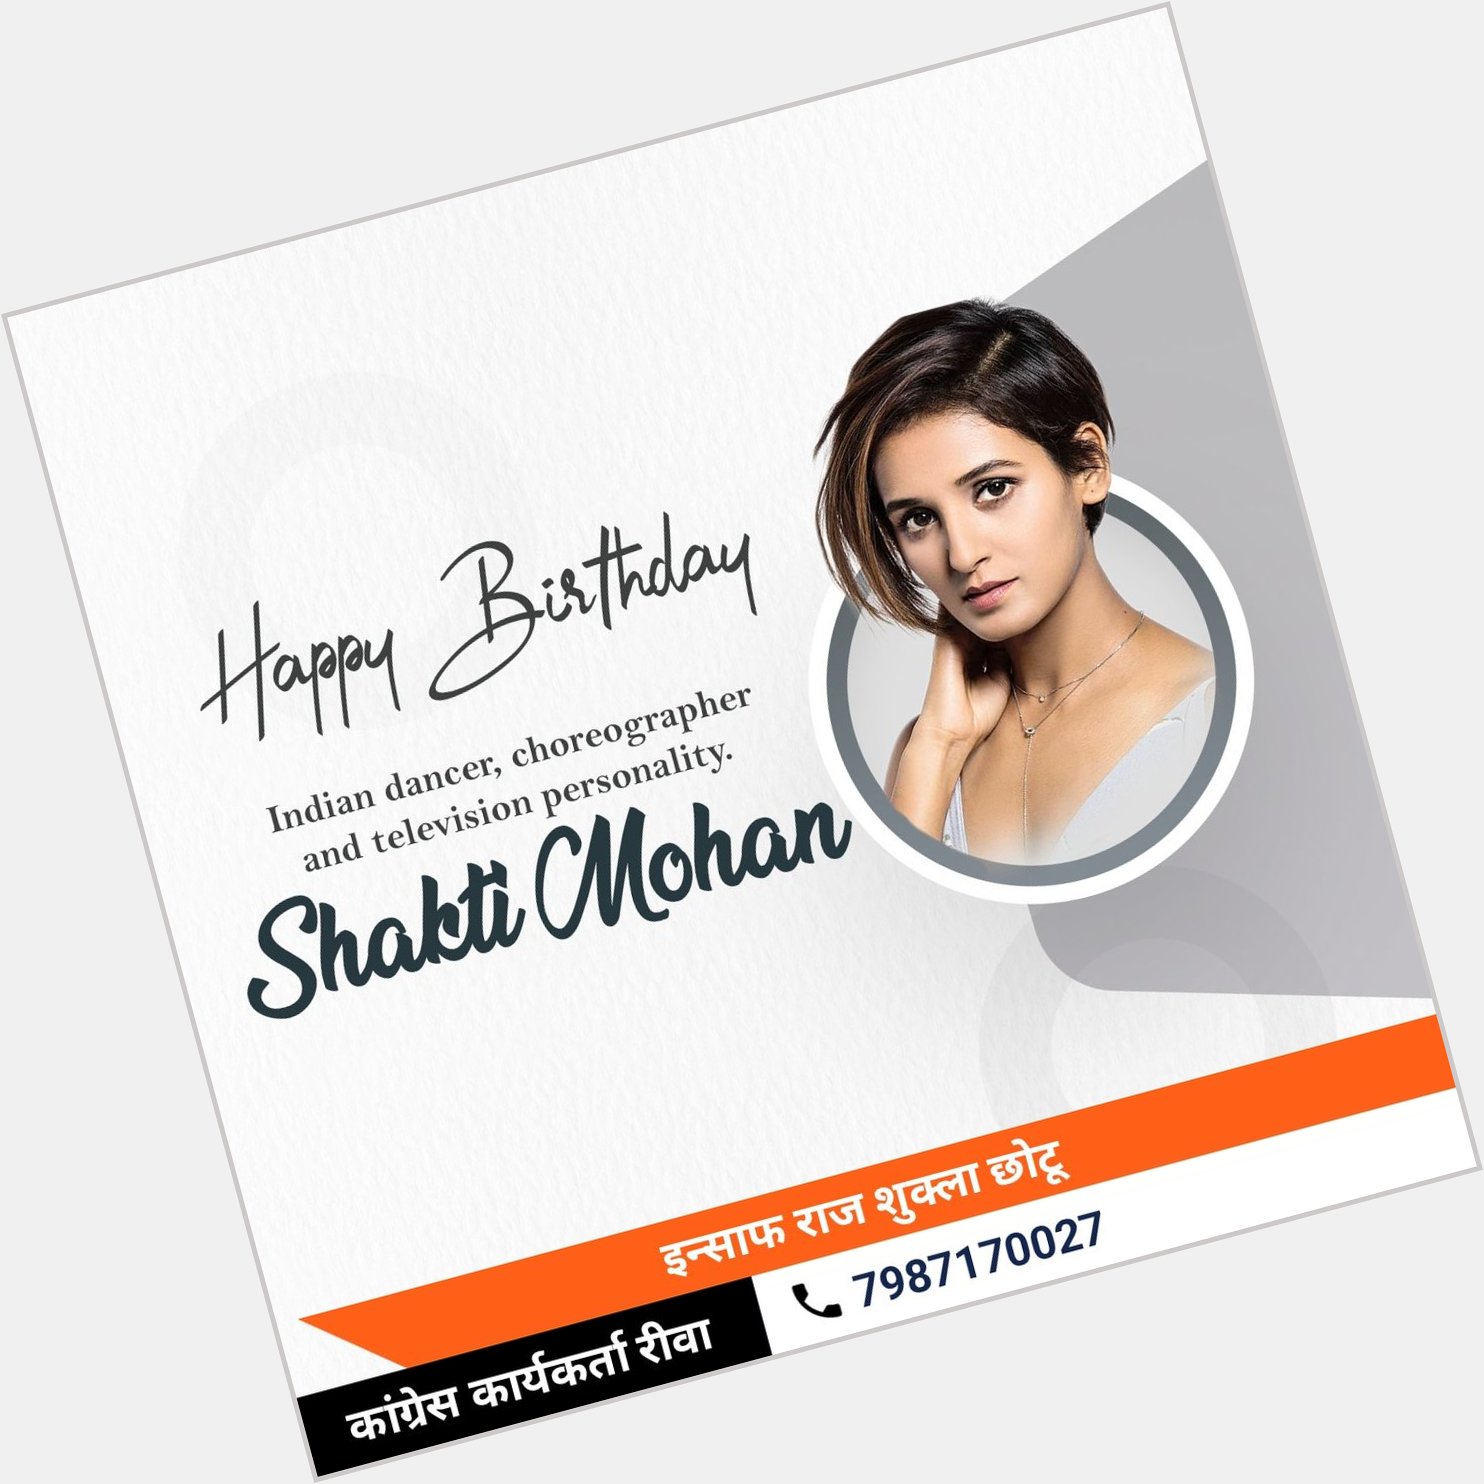 Happy Birthday

Indian dancer, choreographer and television personality. Shakti Mohan 